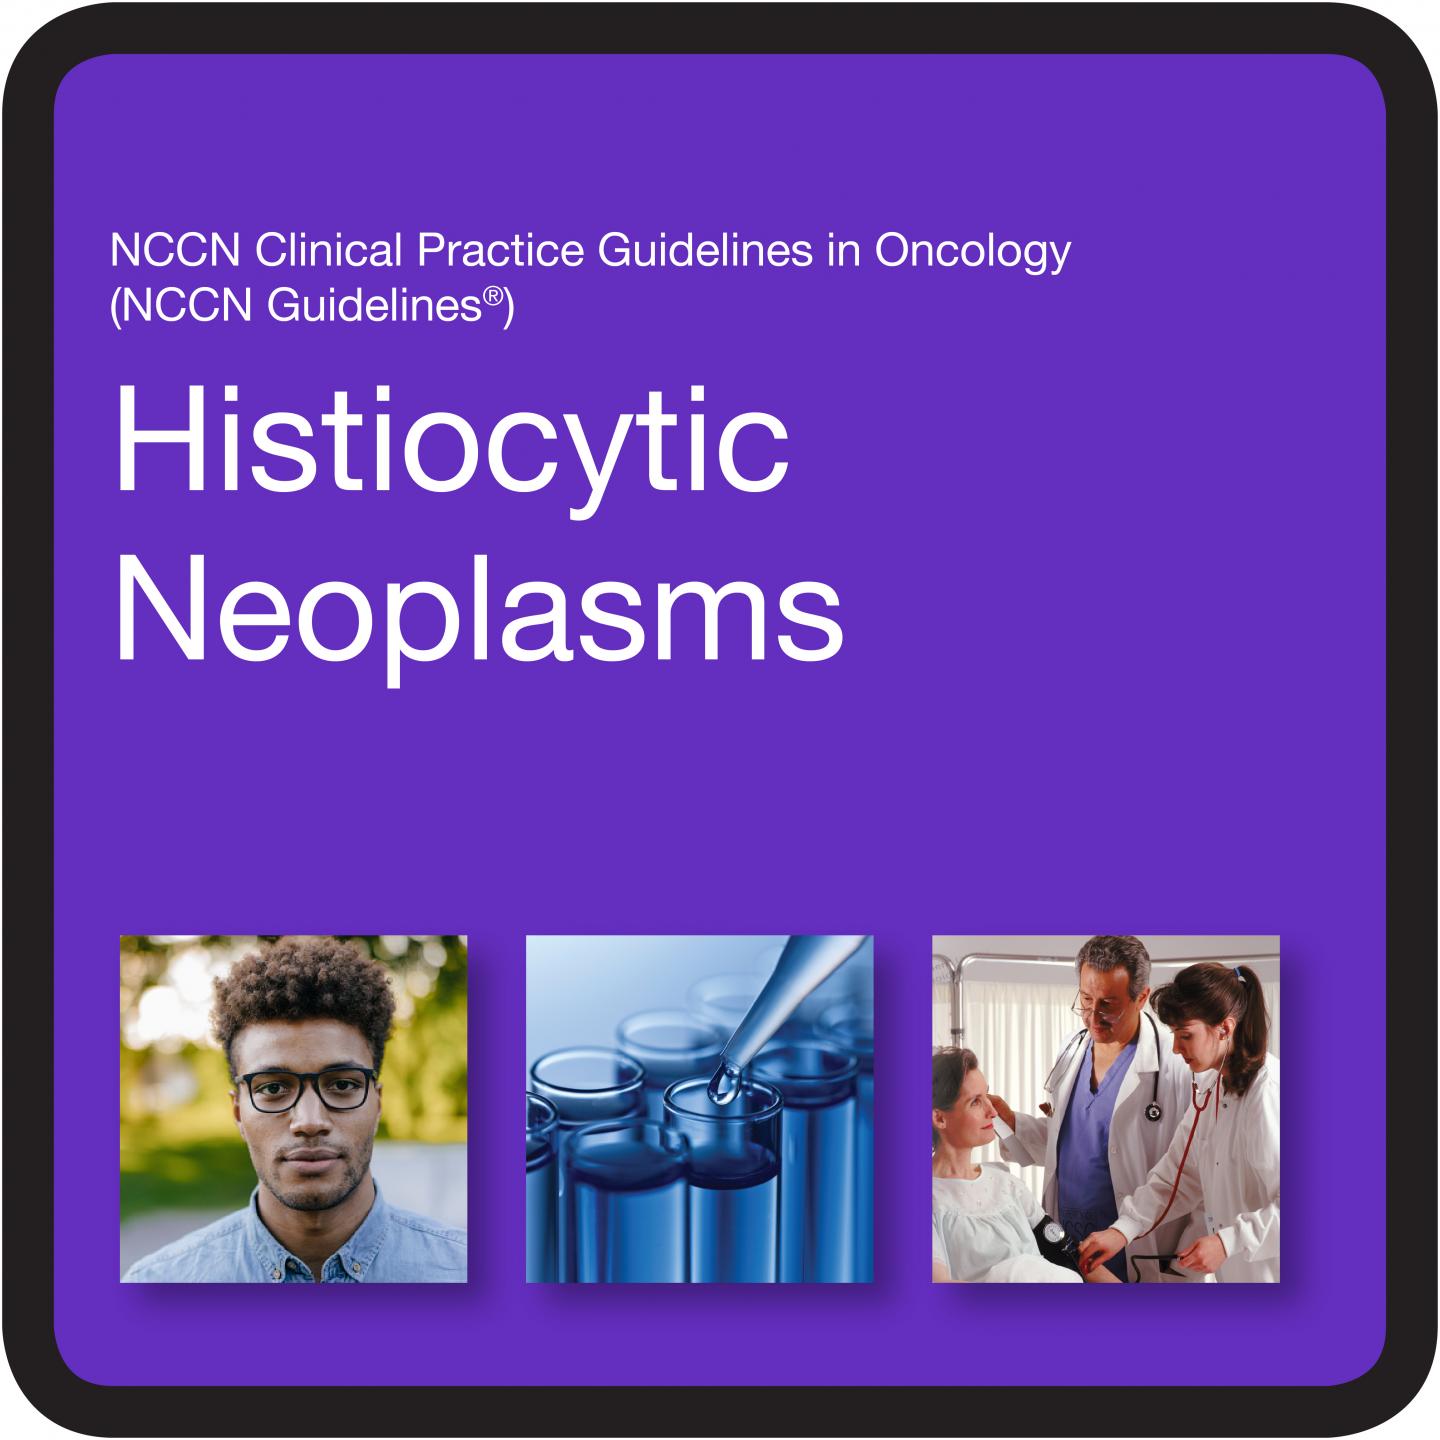 NCCN Guidelines for Histiocytic Neoplasms